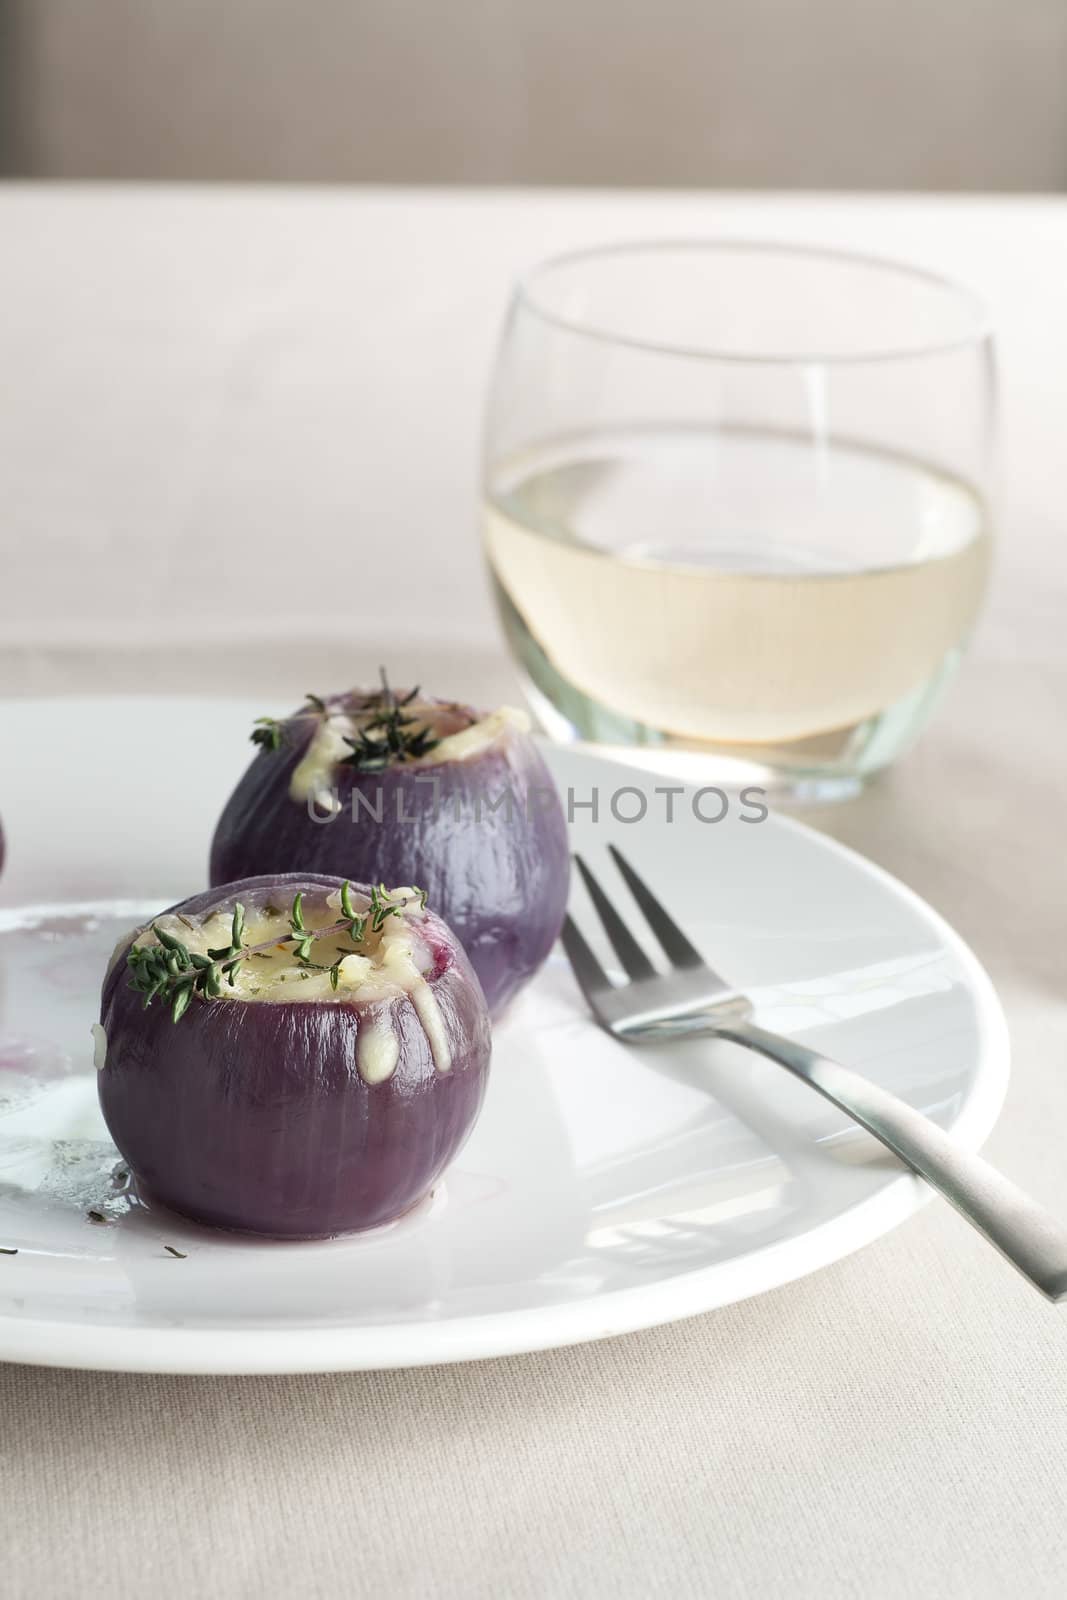 Fresh boiled and stuffed with rice and cheese, seen here with fork and white wine.